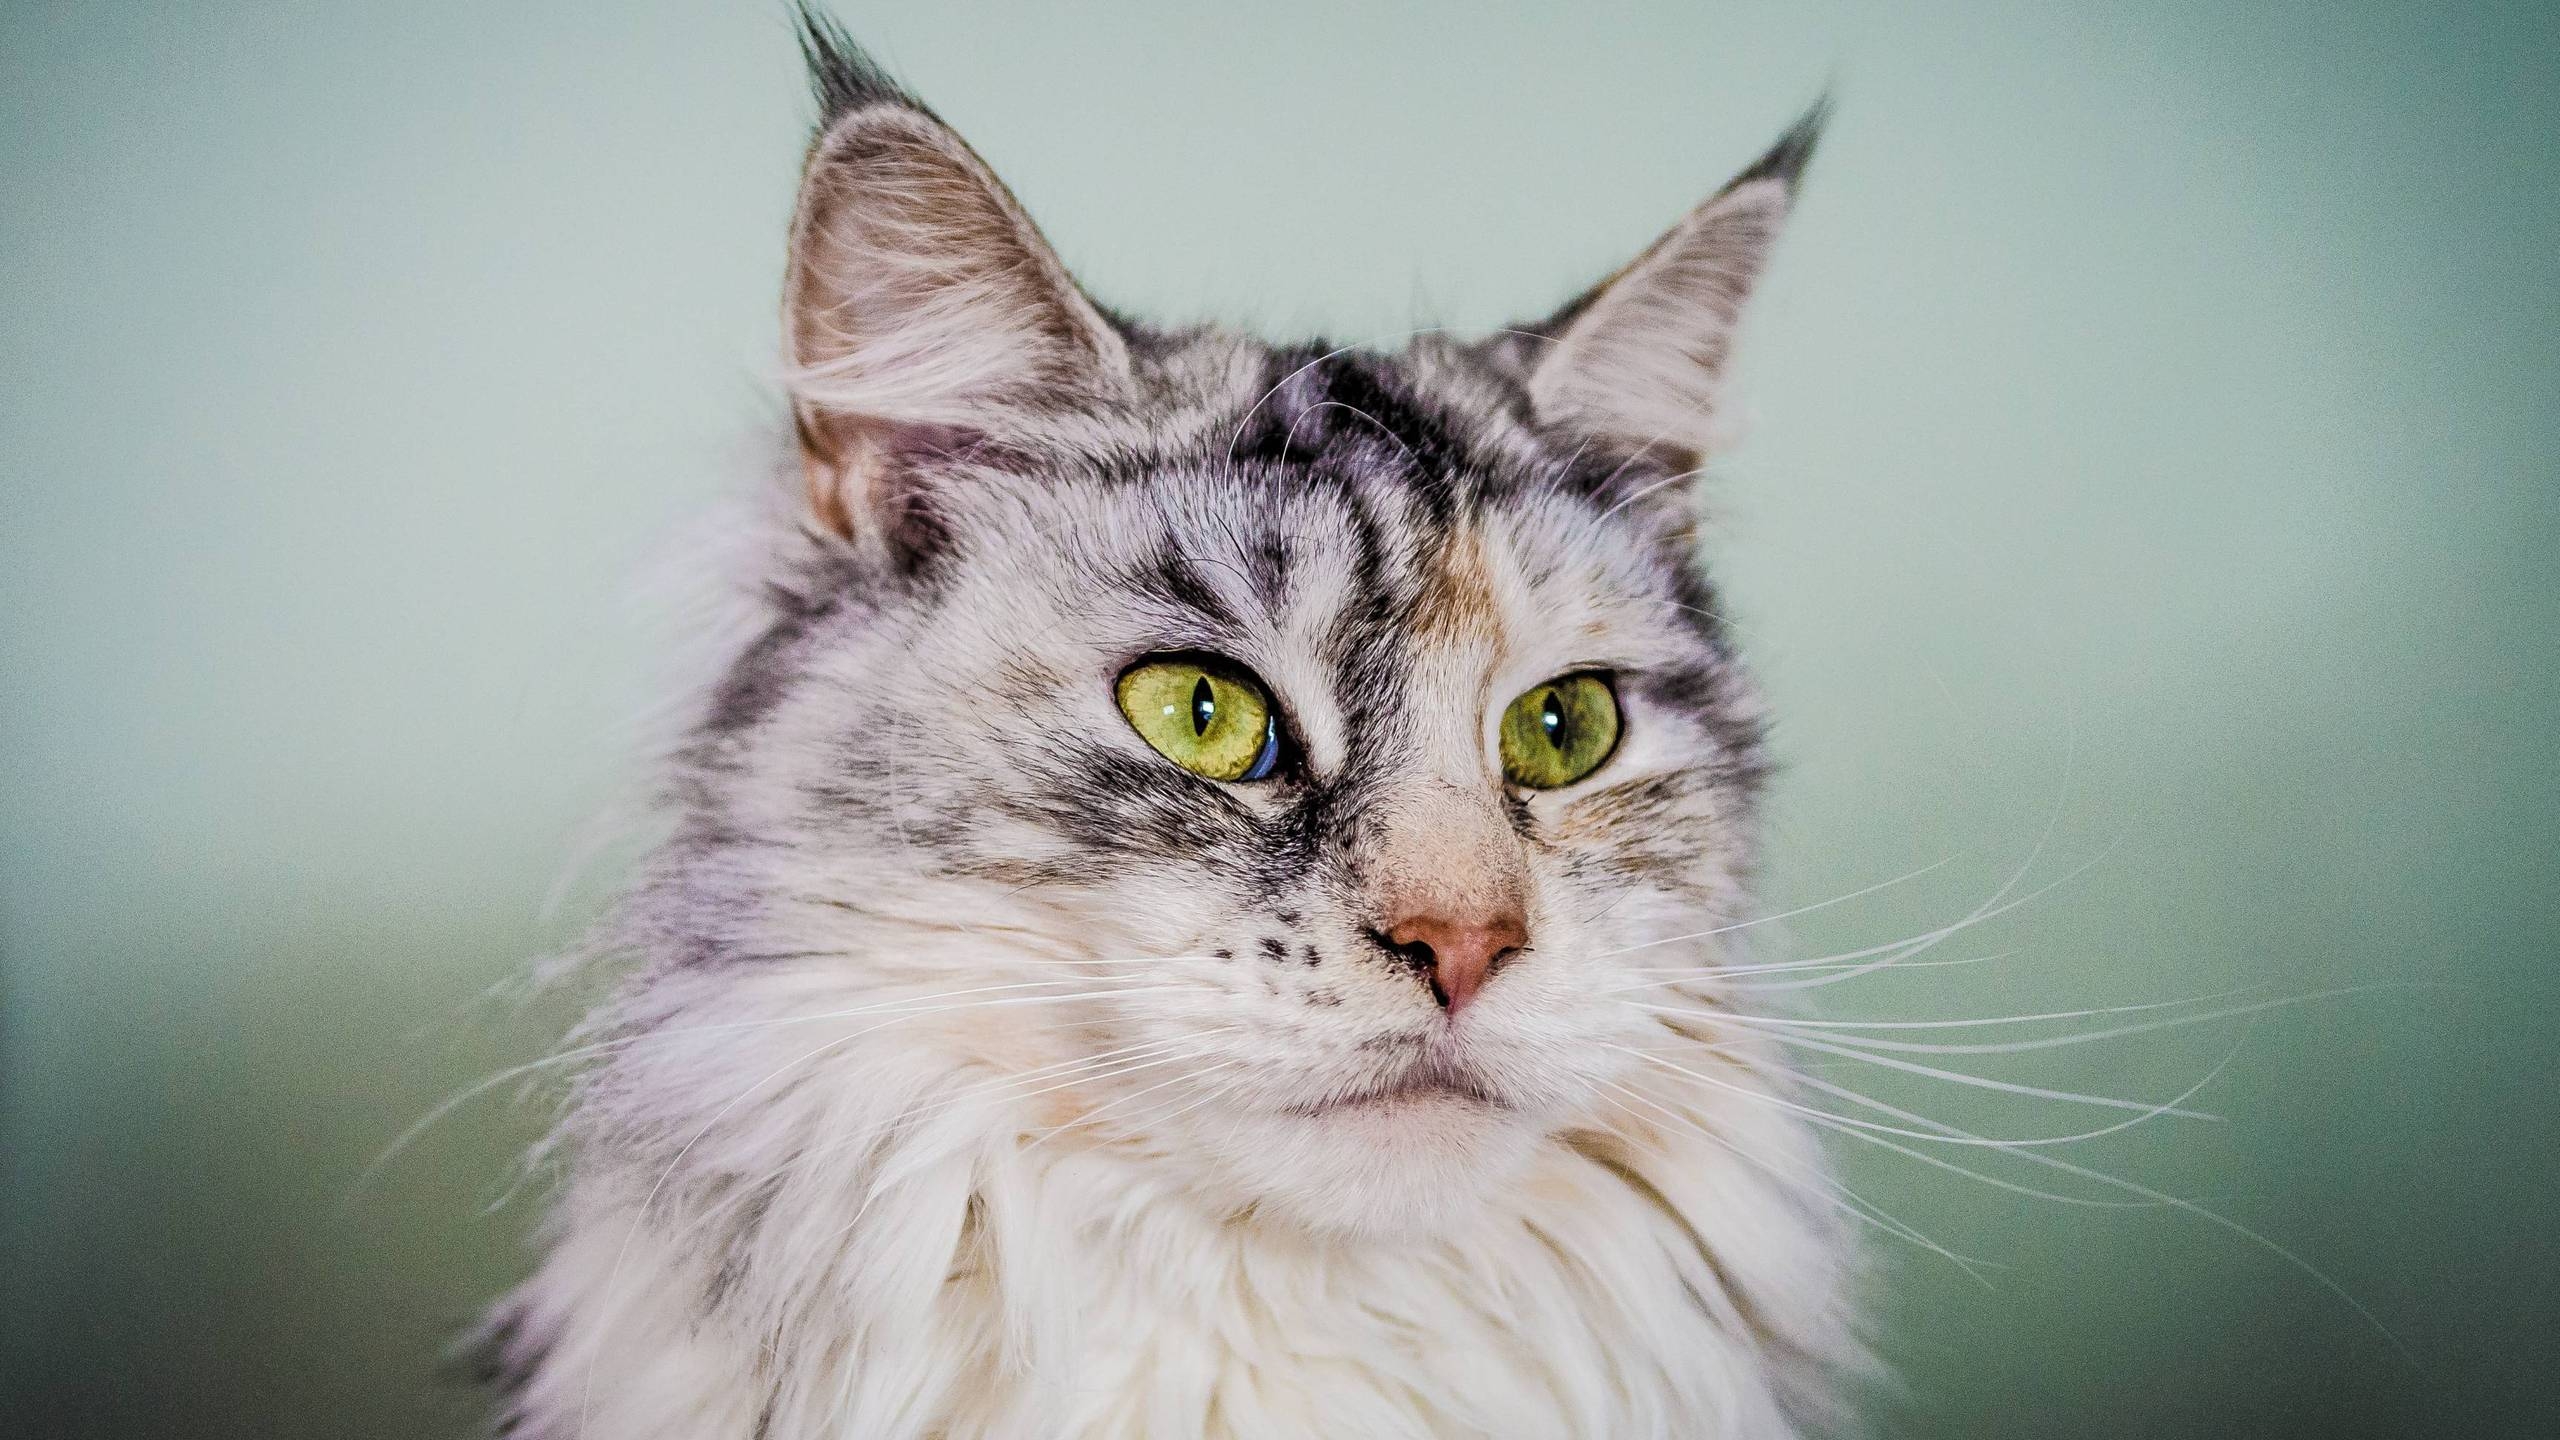 Silver Maine Coon Cat with Green Eyes for 2560x1440 HDTV resolution